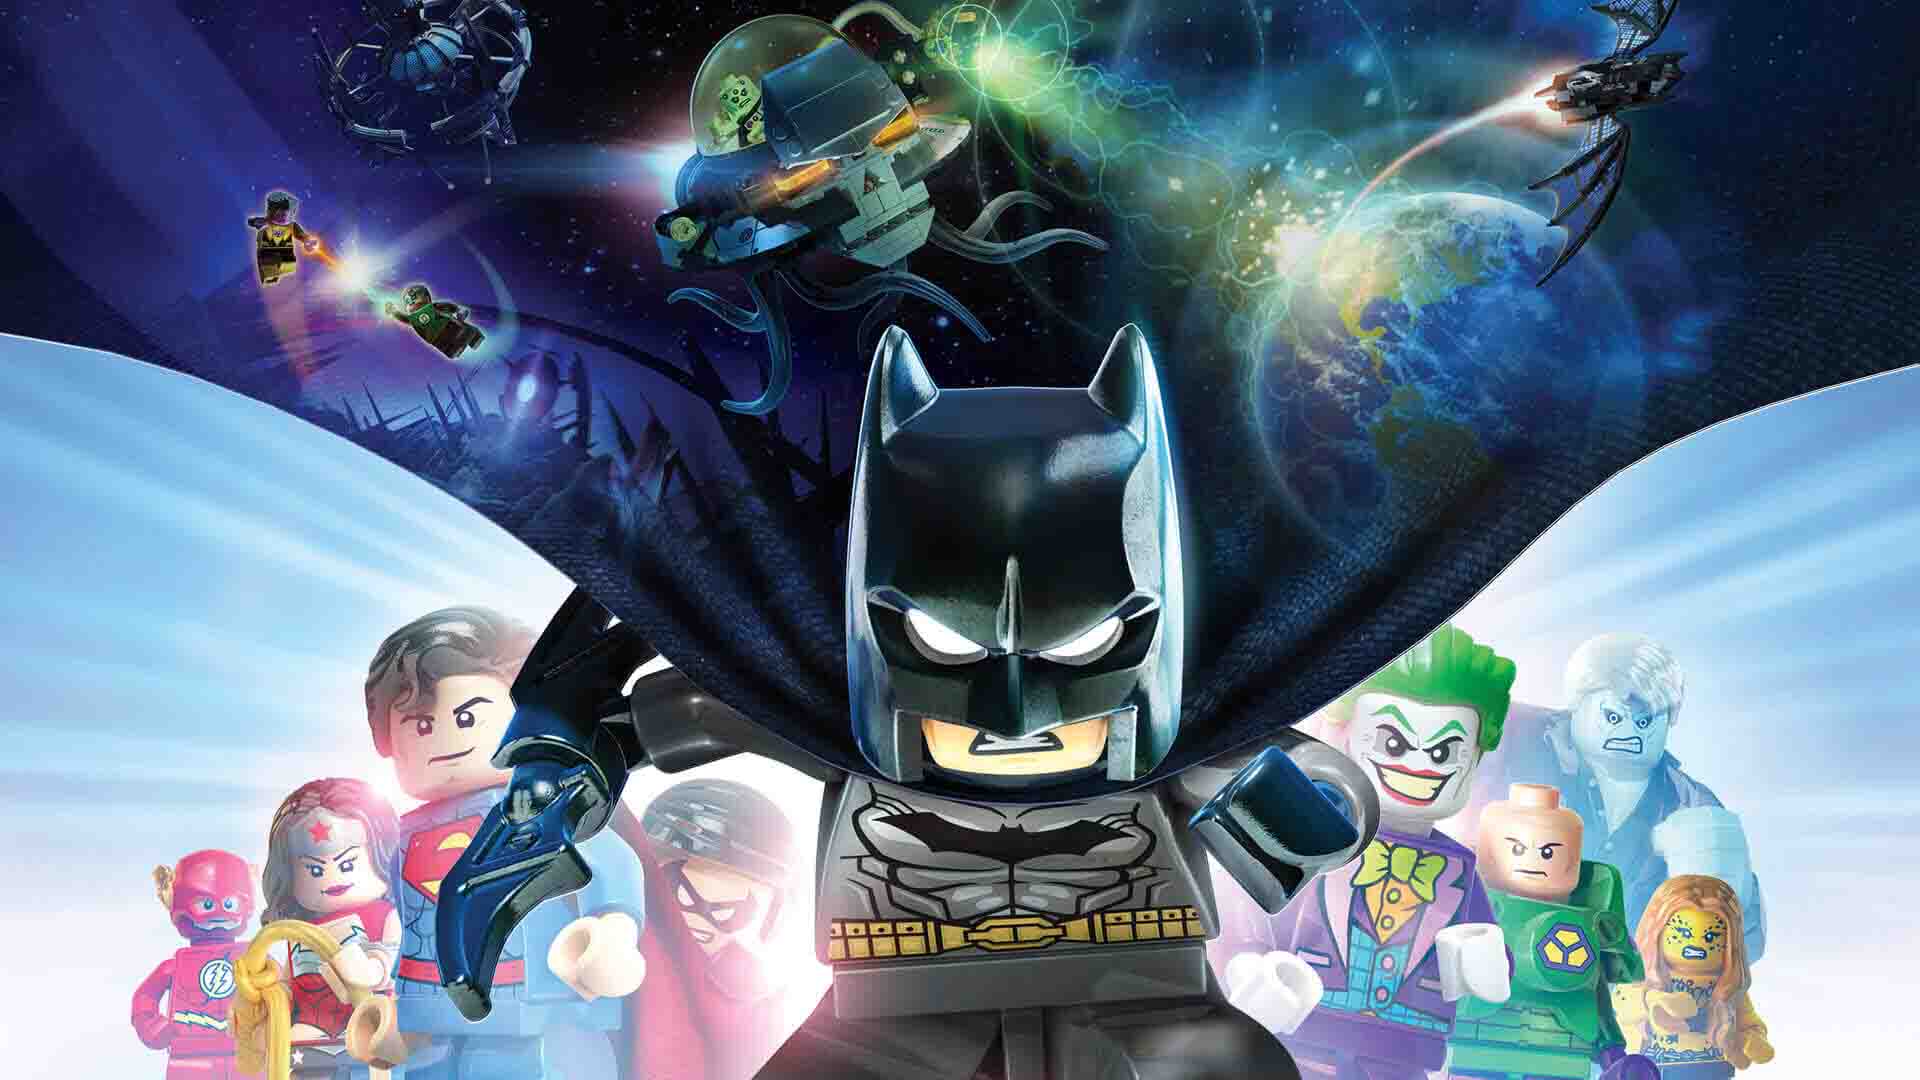 LEGO® Batman™ 3: Beyond Gotham System Requirements for PC Games minimum, recommended specifications for Windows, CPU, OS, RAM Memory, Storage, and GPU.